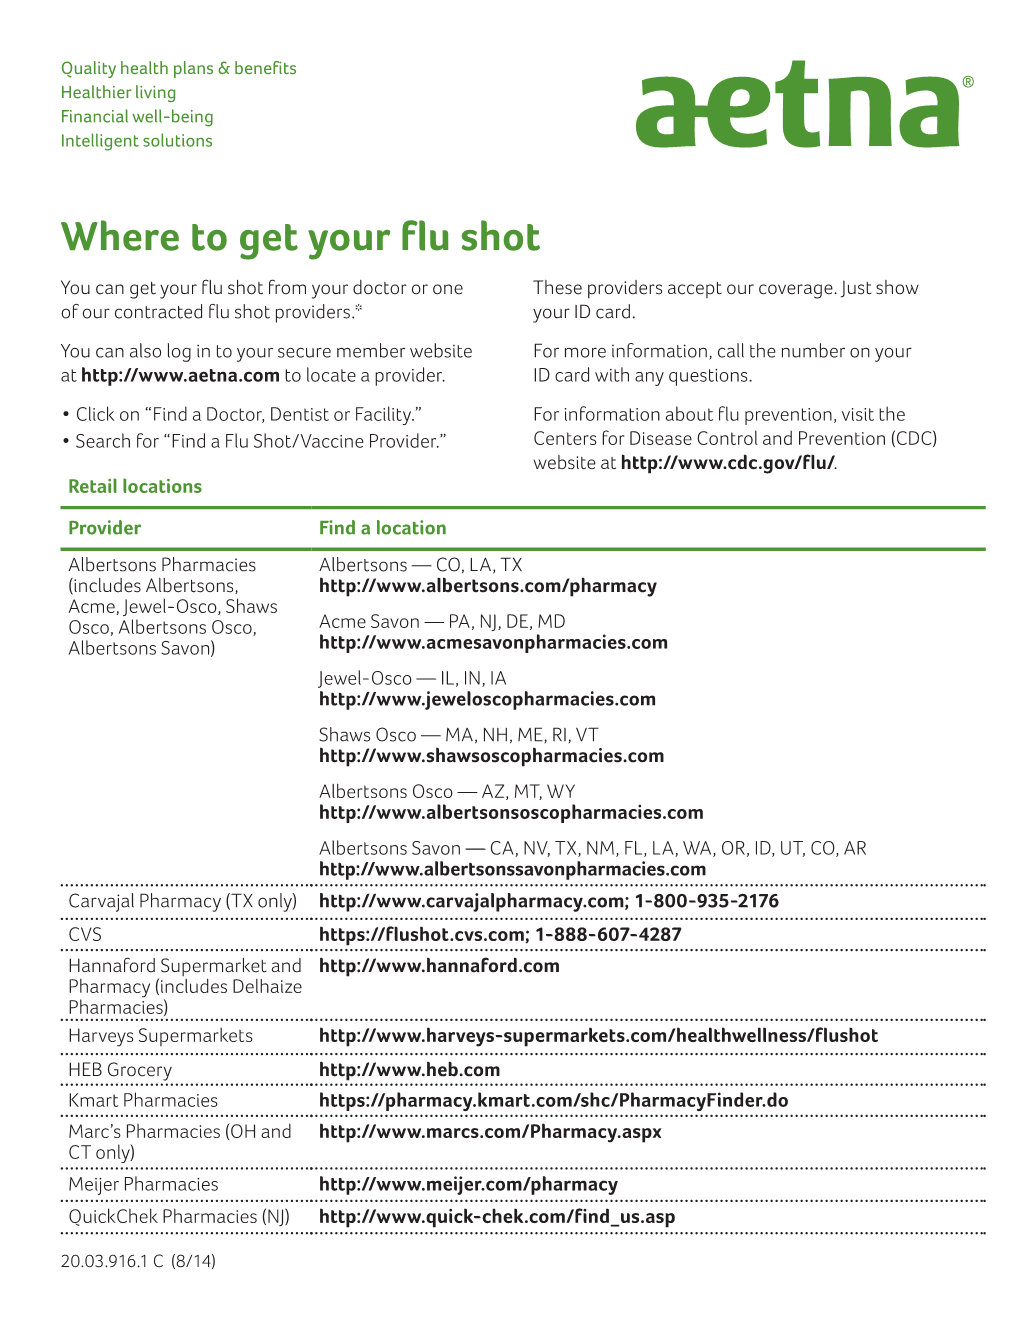 Where to Get Your Flu Shot You Can Get Your Flu Shot from Your Doctor Or One These Providers Accept Our Coverage